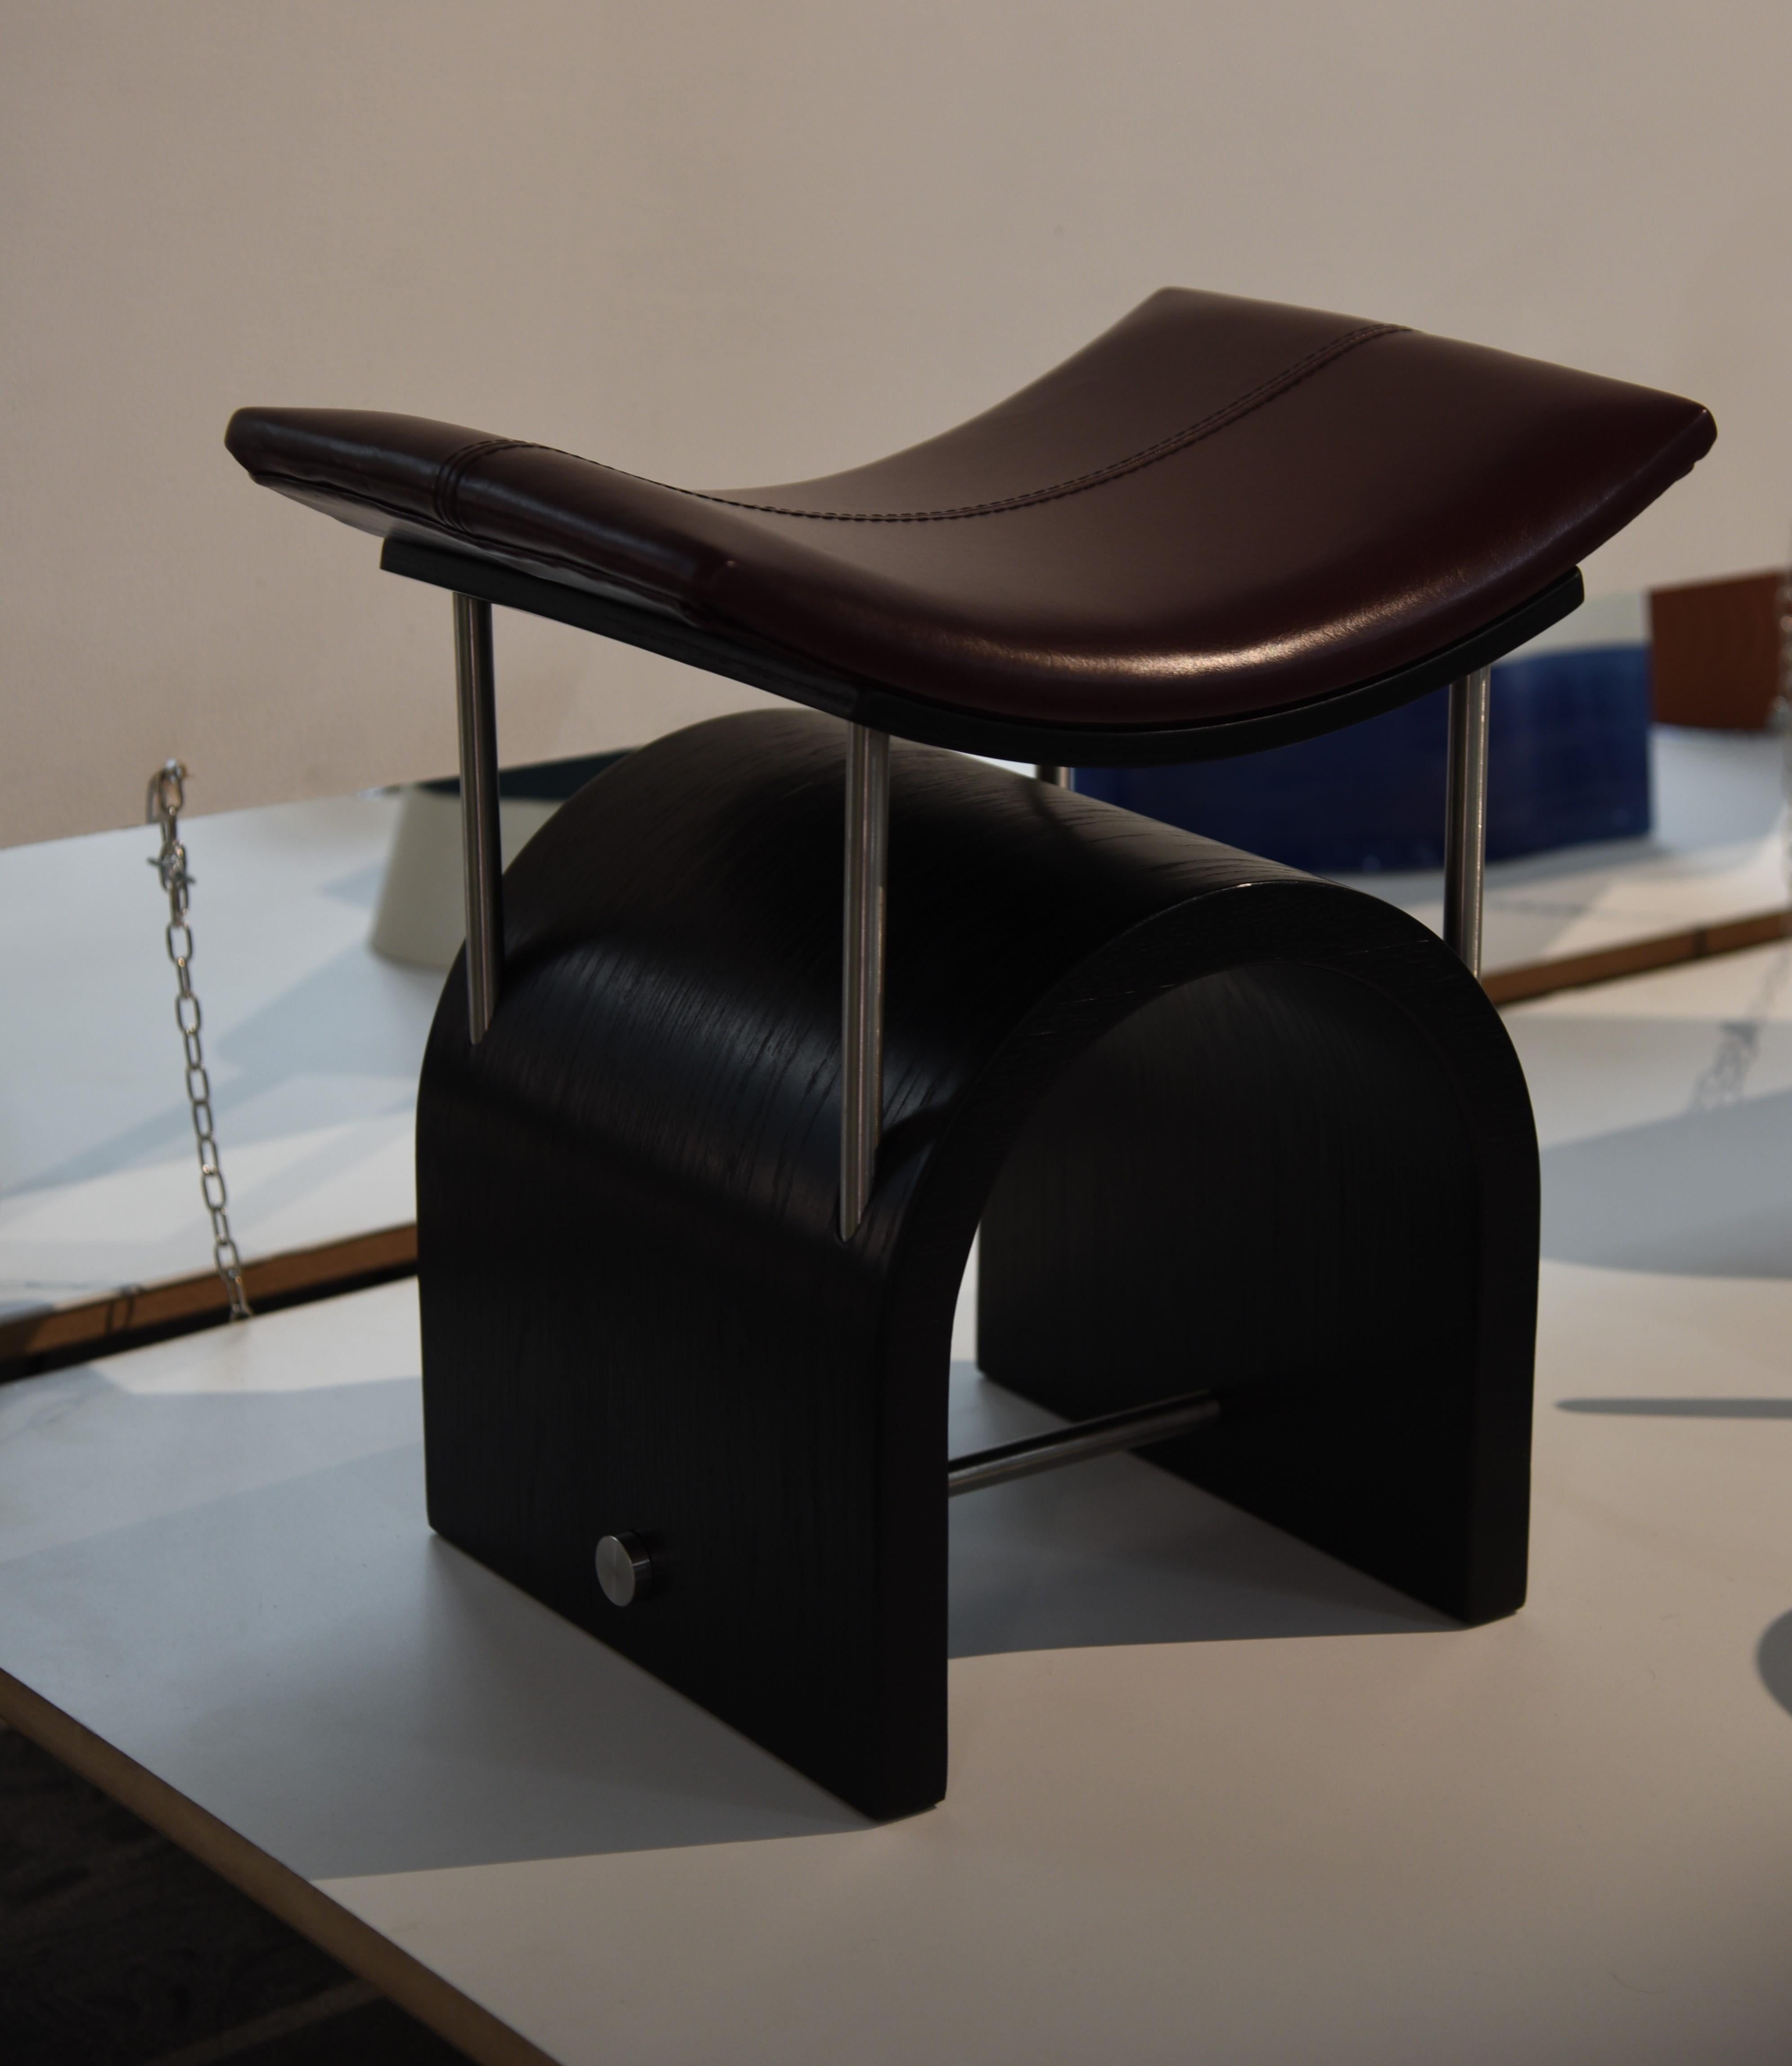 Wing stool by Studio Laf 
Dimensions: L43 cm x W35 x H44 cm
Materials: Plywood, Stainless Steel, Leather
Available: different colours Leather: Brown, Black, Antique Brown, Cherry Red.  Also available in Wood: Black, Walnut, Dark Walnut, please